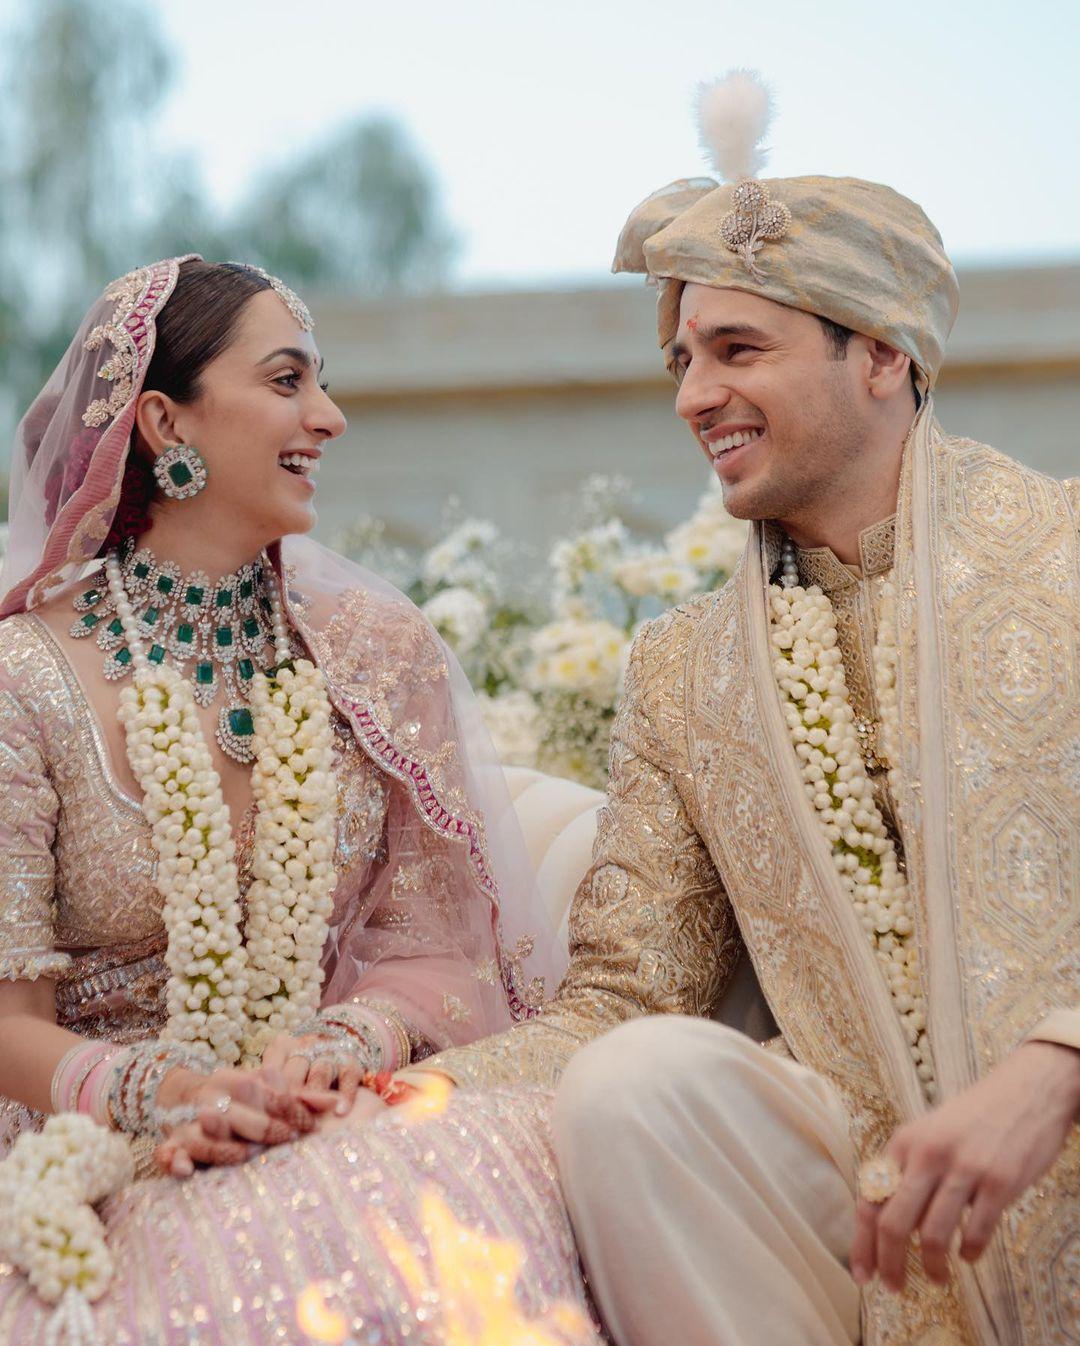 Bollywood’s favourite couple, Sidharth Malhotra and Kiara Advani tied the knot at Jaisalmer’s Suryagarh Palace. The luxury hotel served as a perfect destination for the couple’s nuptials 